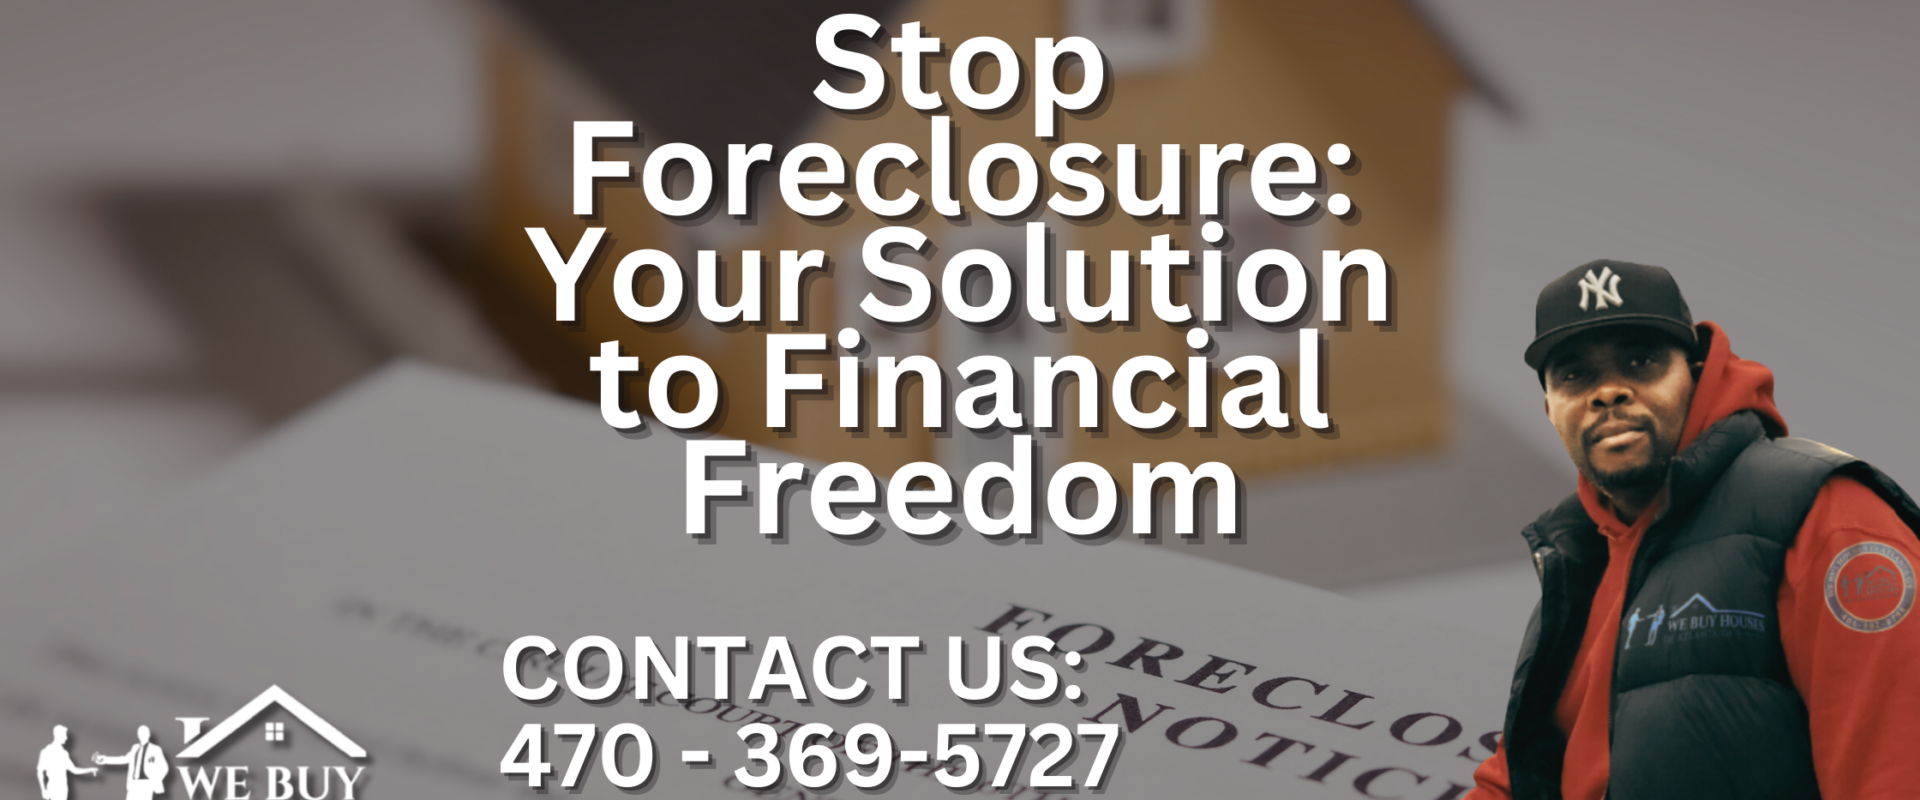 Stop-Foreclosure-Your-Solution-to-Financial-Freedom